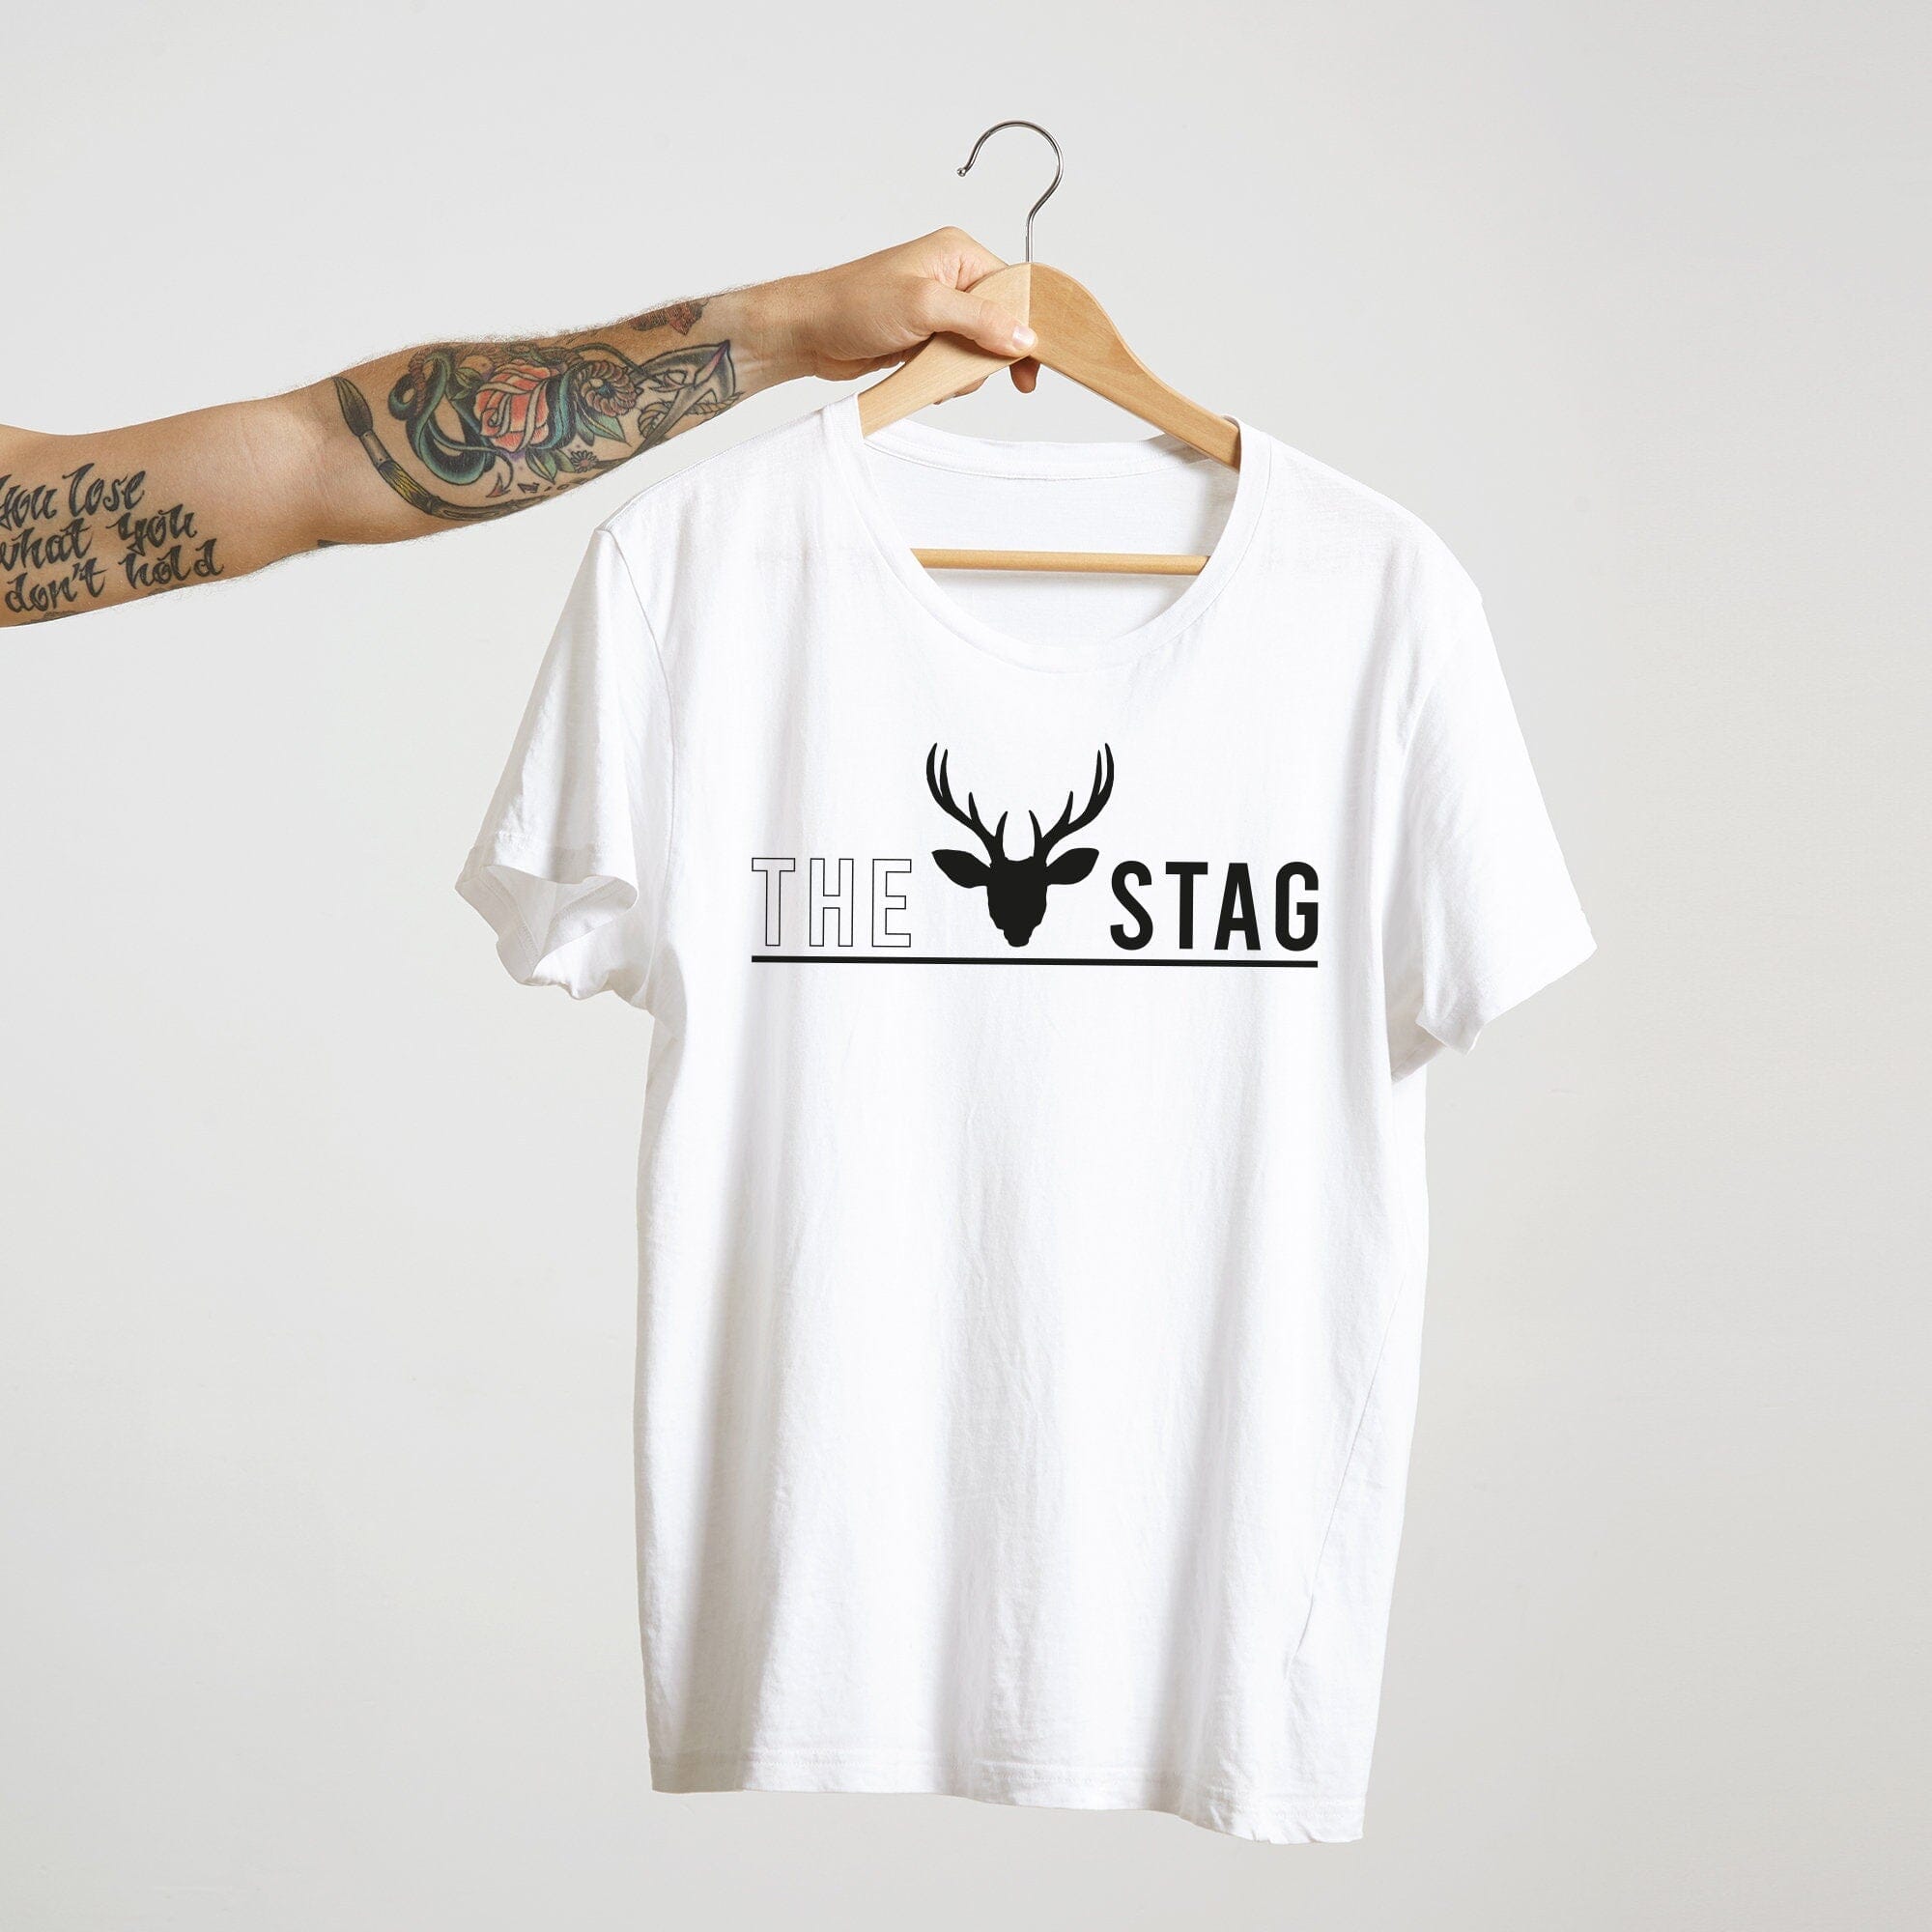 The Stag T-Shirt, Groom Gift, Funny Men'S Stag Night Tee, Stag Do, Honeymoon Engagement Outfit